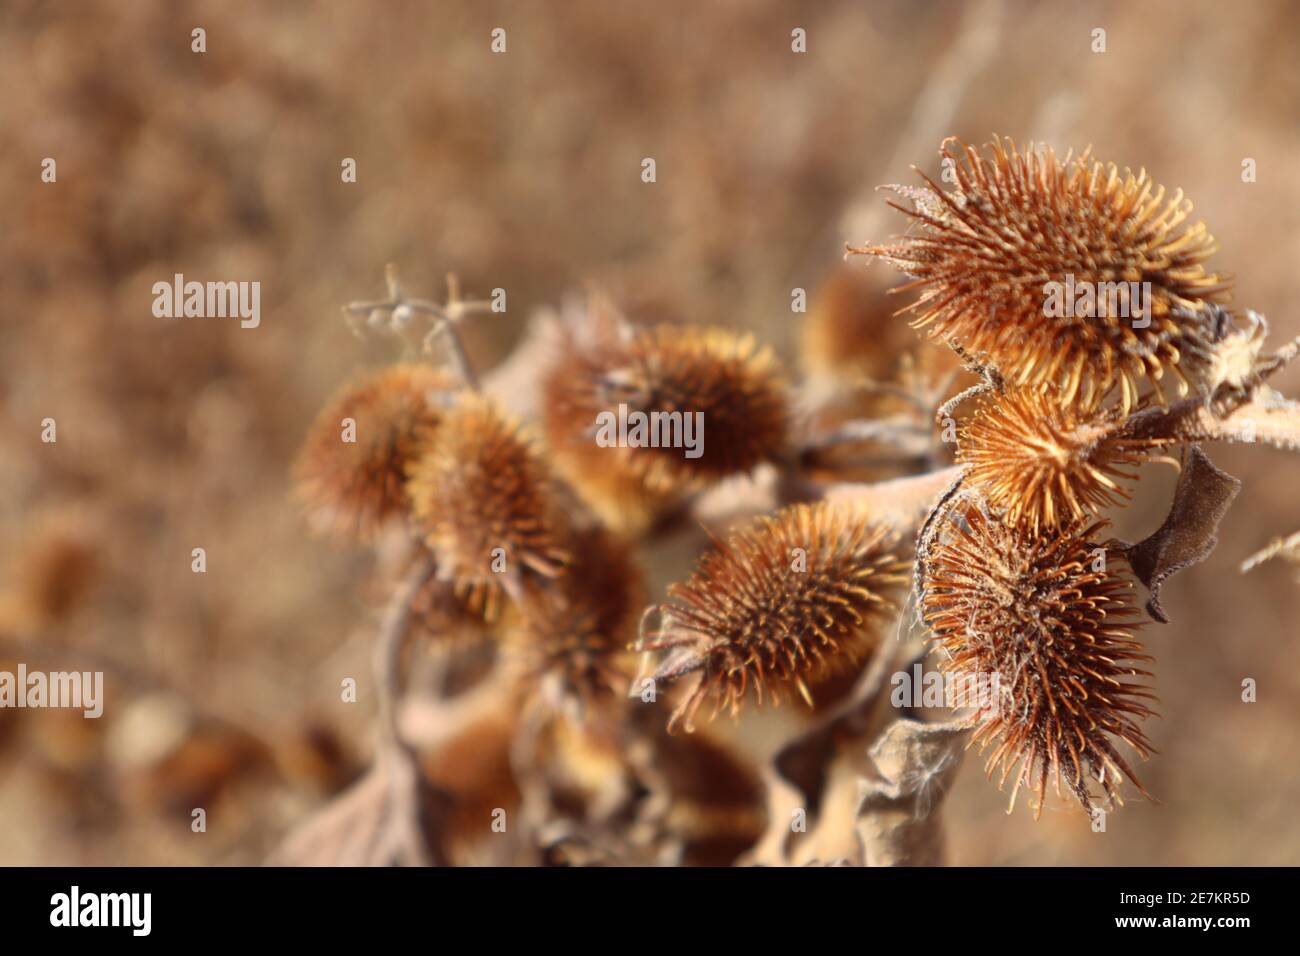 Burs stickers on a dried brown plant in the high desert town of Clarksdale, Arizona Stock Photo